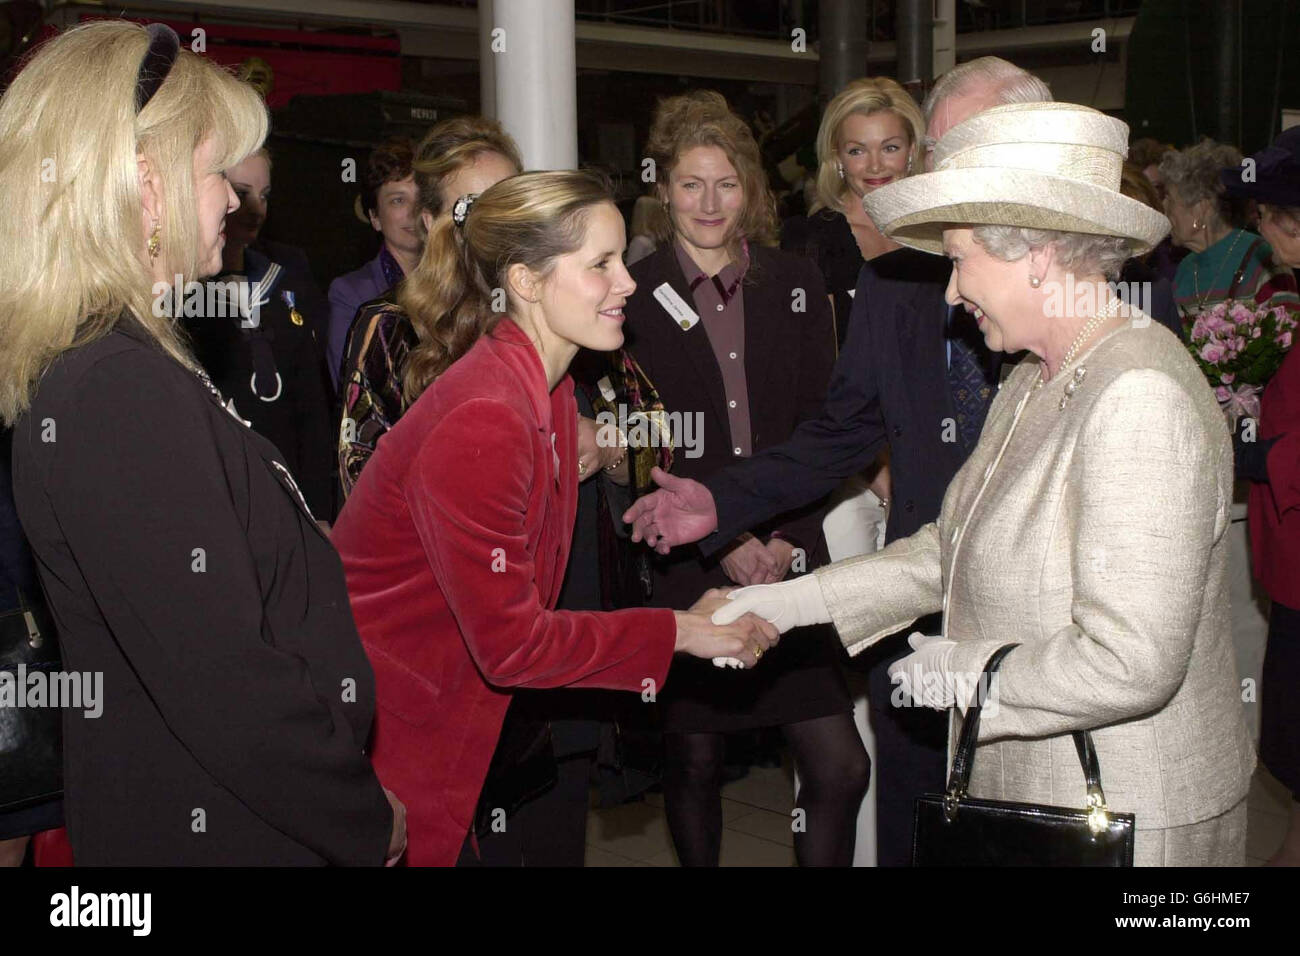 Britain's Queen Elizabeth II meets ballerina Darcy Bussell at the Women in War exhibition at the Imperial War Museum, London. * The Queen was reunited with a group of wartime friends at the event as she relived her memories of joining the services during the Second World War. No230873 Second Subaltern Elizabeth Alexandra Mary Windsor, as she was known in 1945, met six fellow former members of the Auxiliary Territorial Service. The women trained together with the teenage Princess at a three- week driving and mechanics course in Camberley, Surrey. Stock Photo